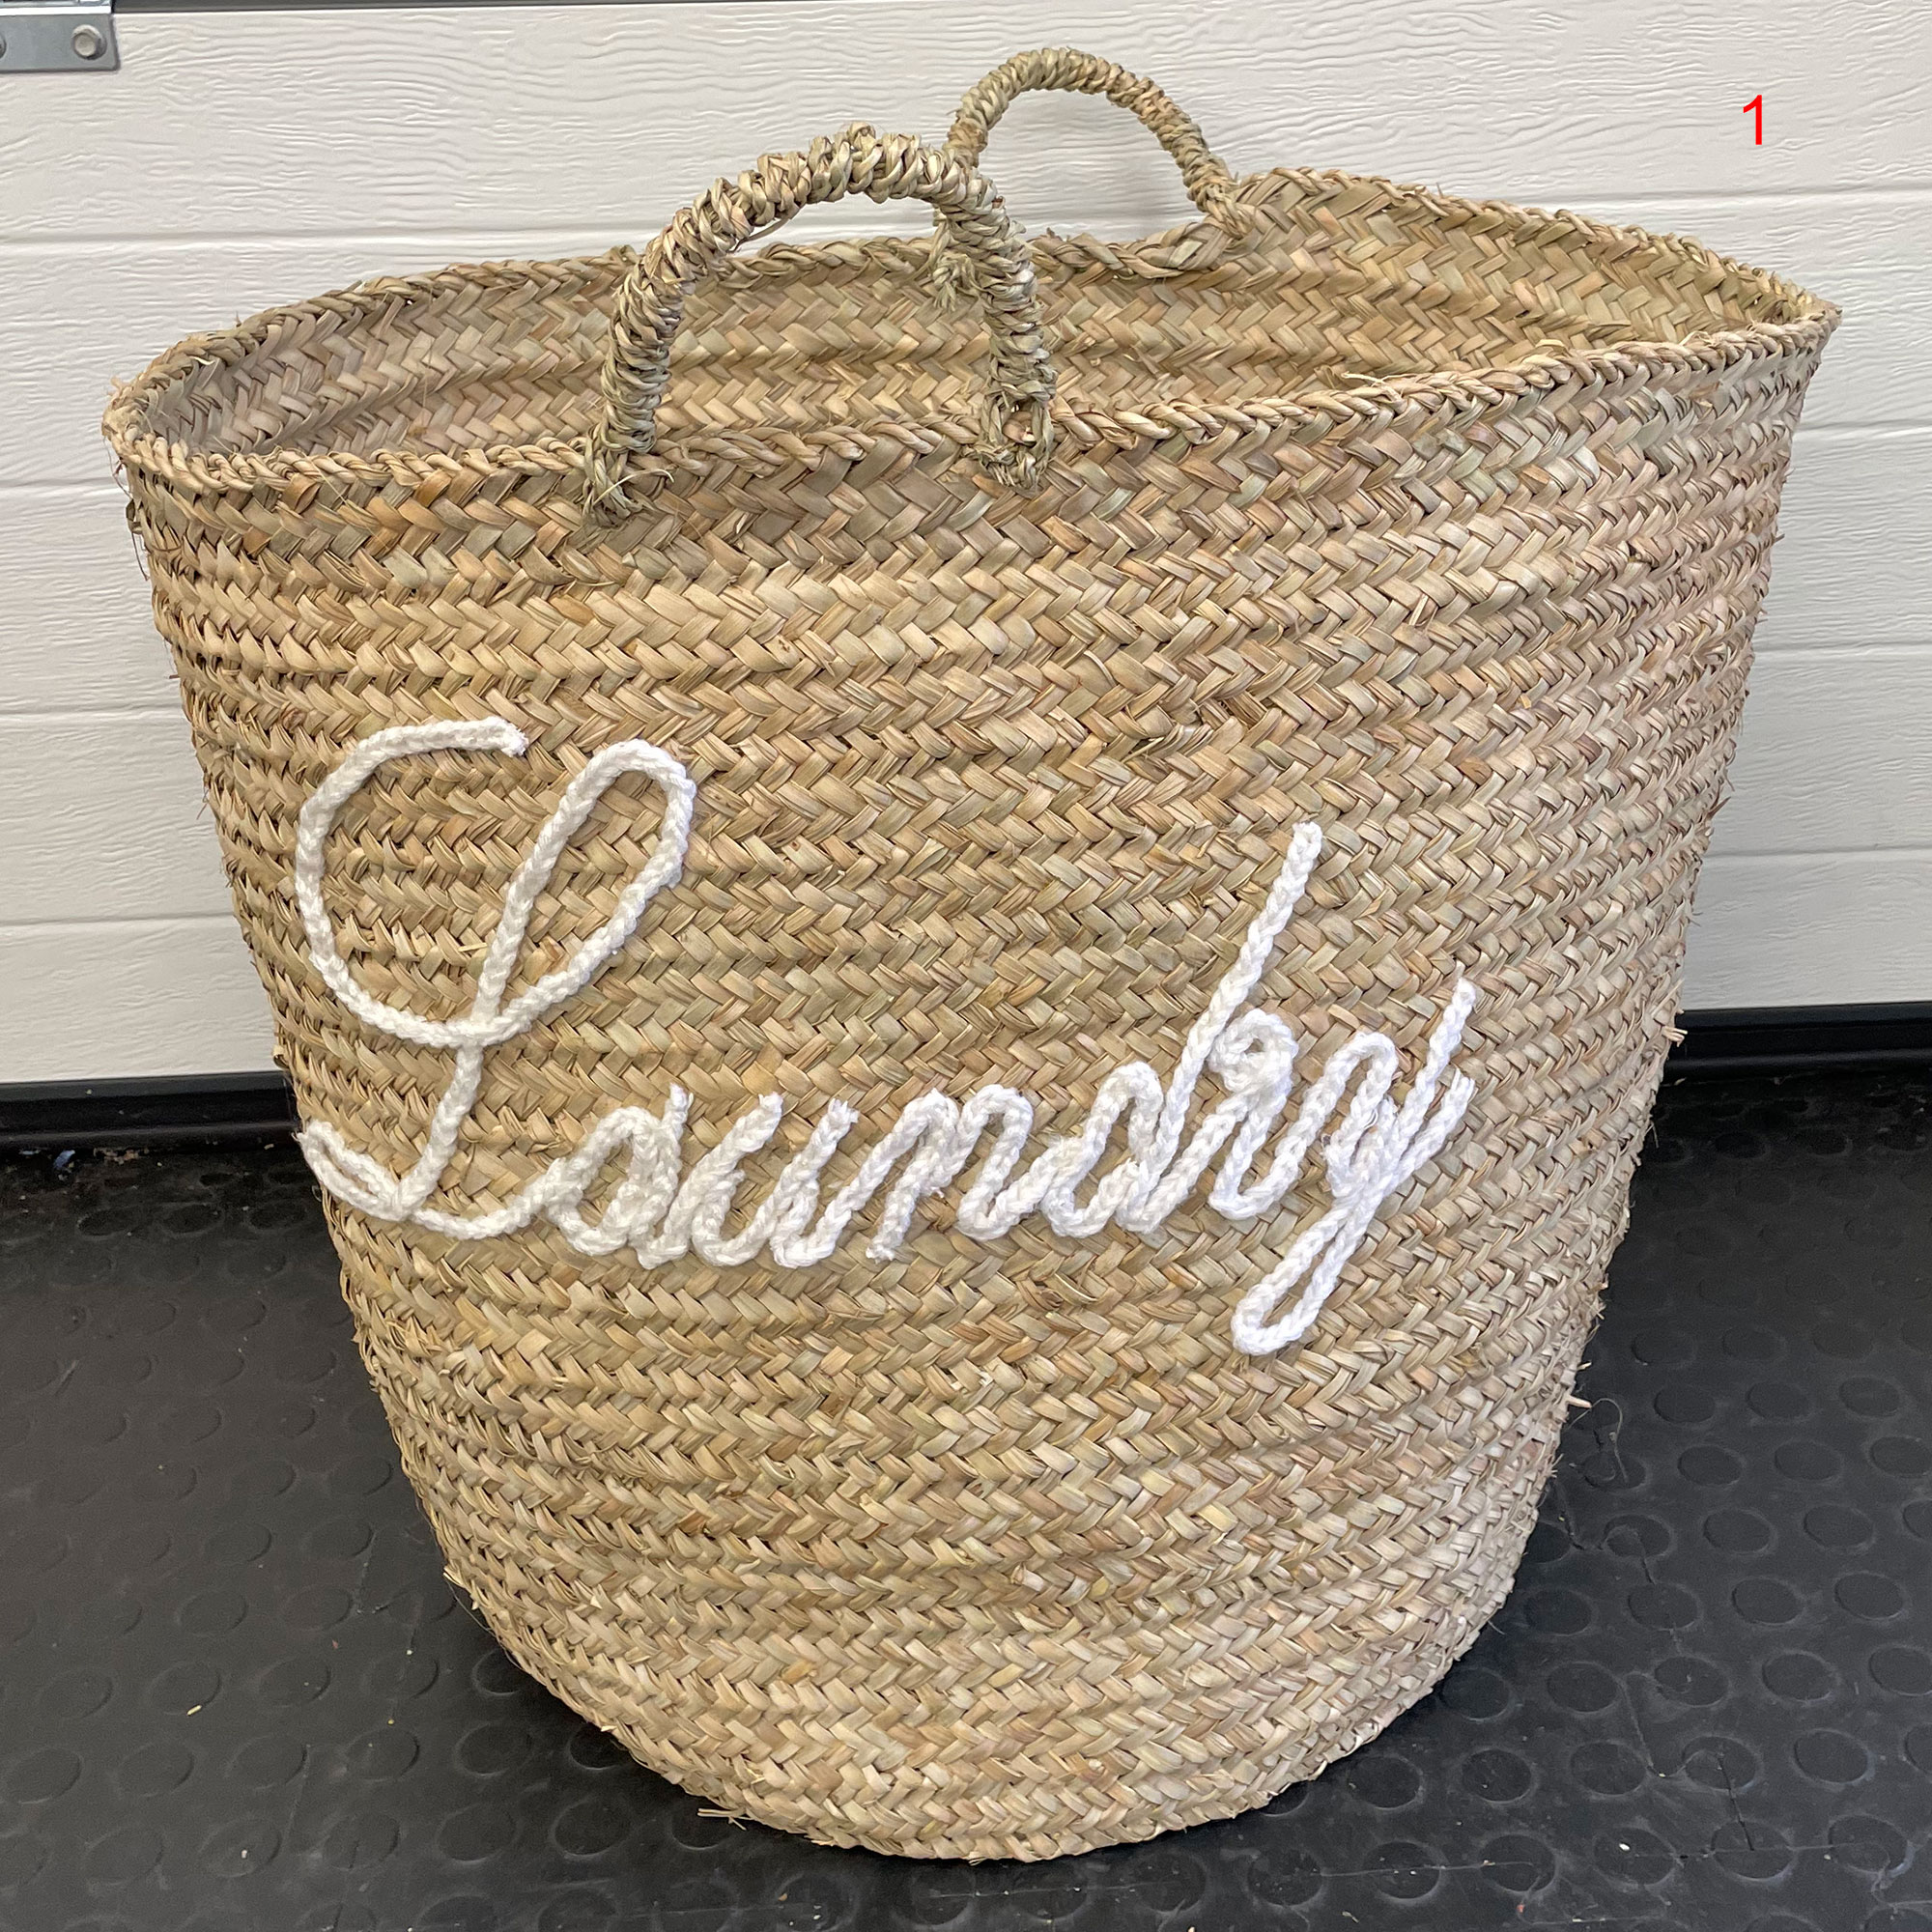 Seconds - Embroidered Laundry Basket